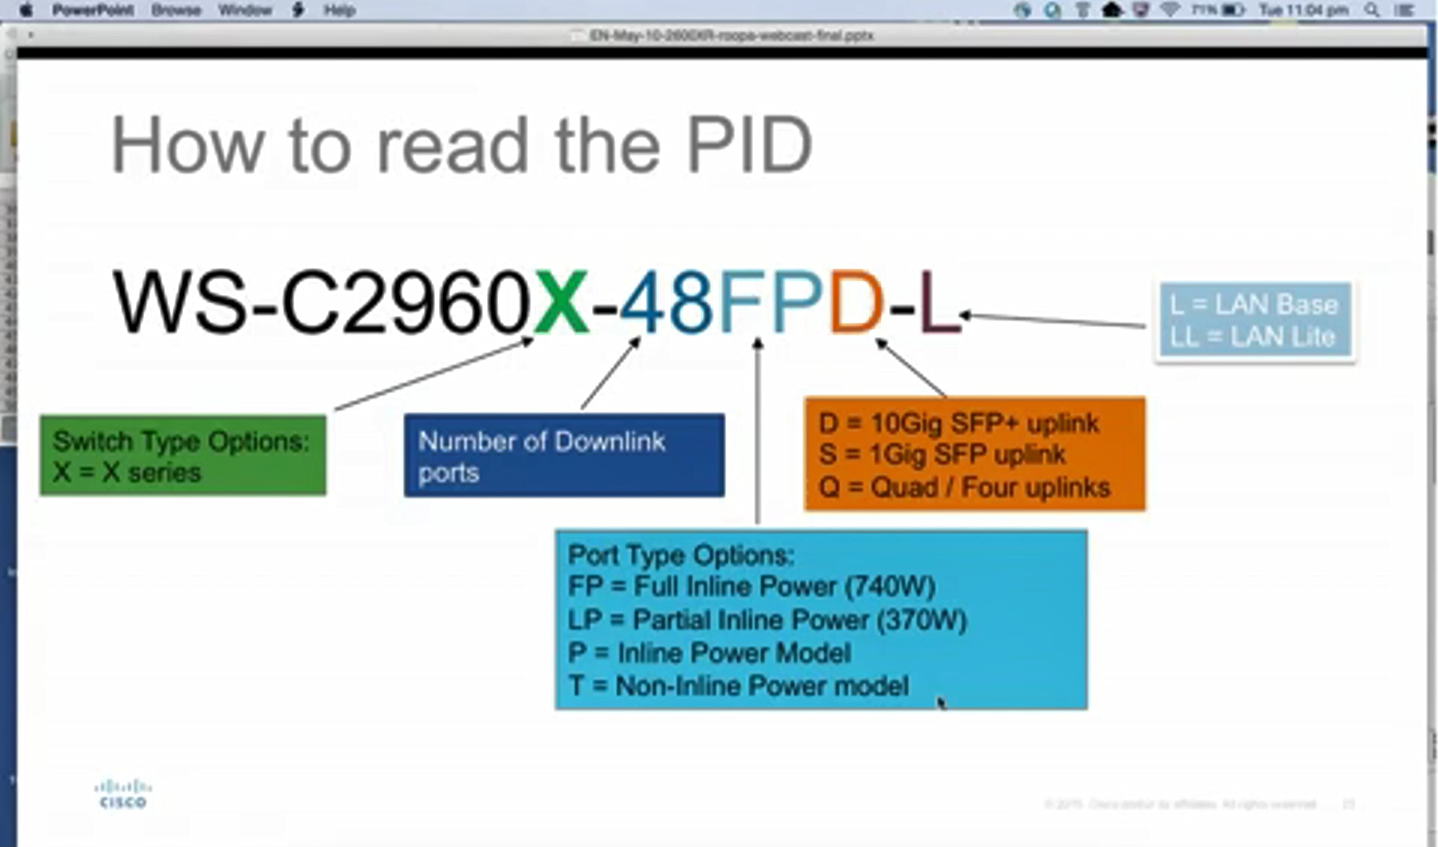 How to read the PID